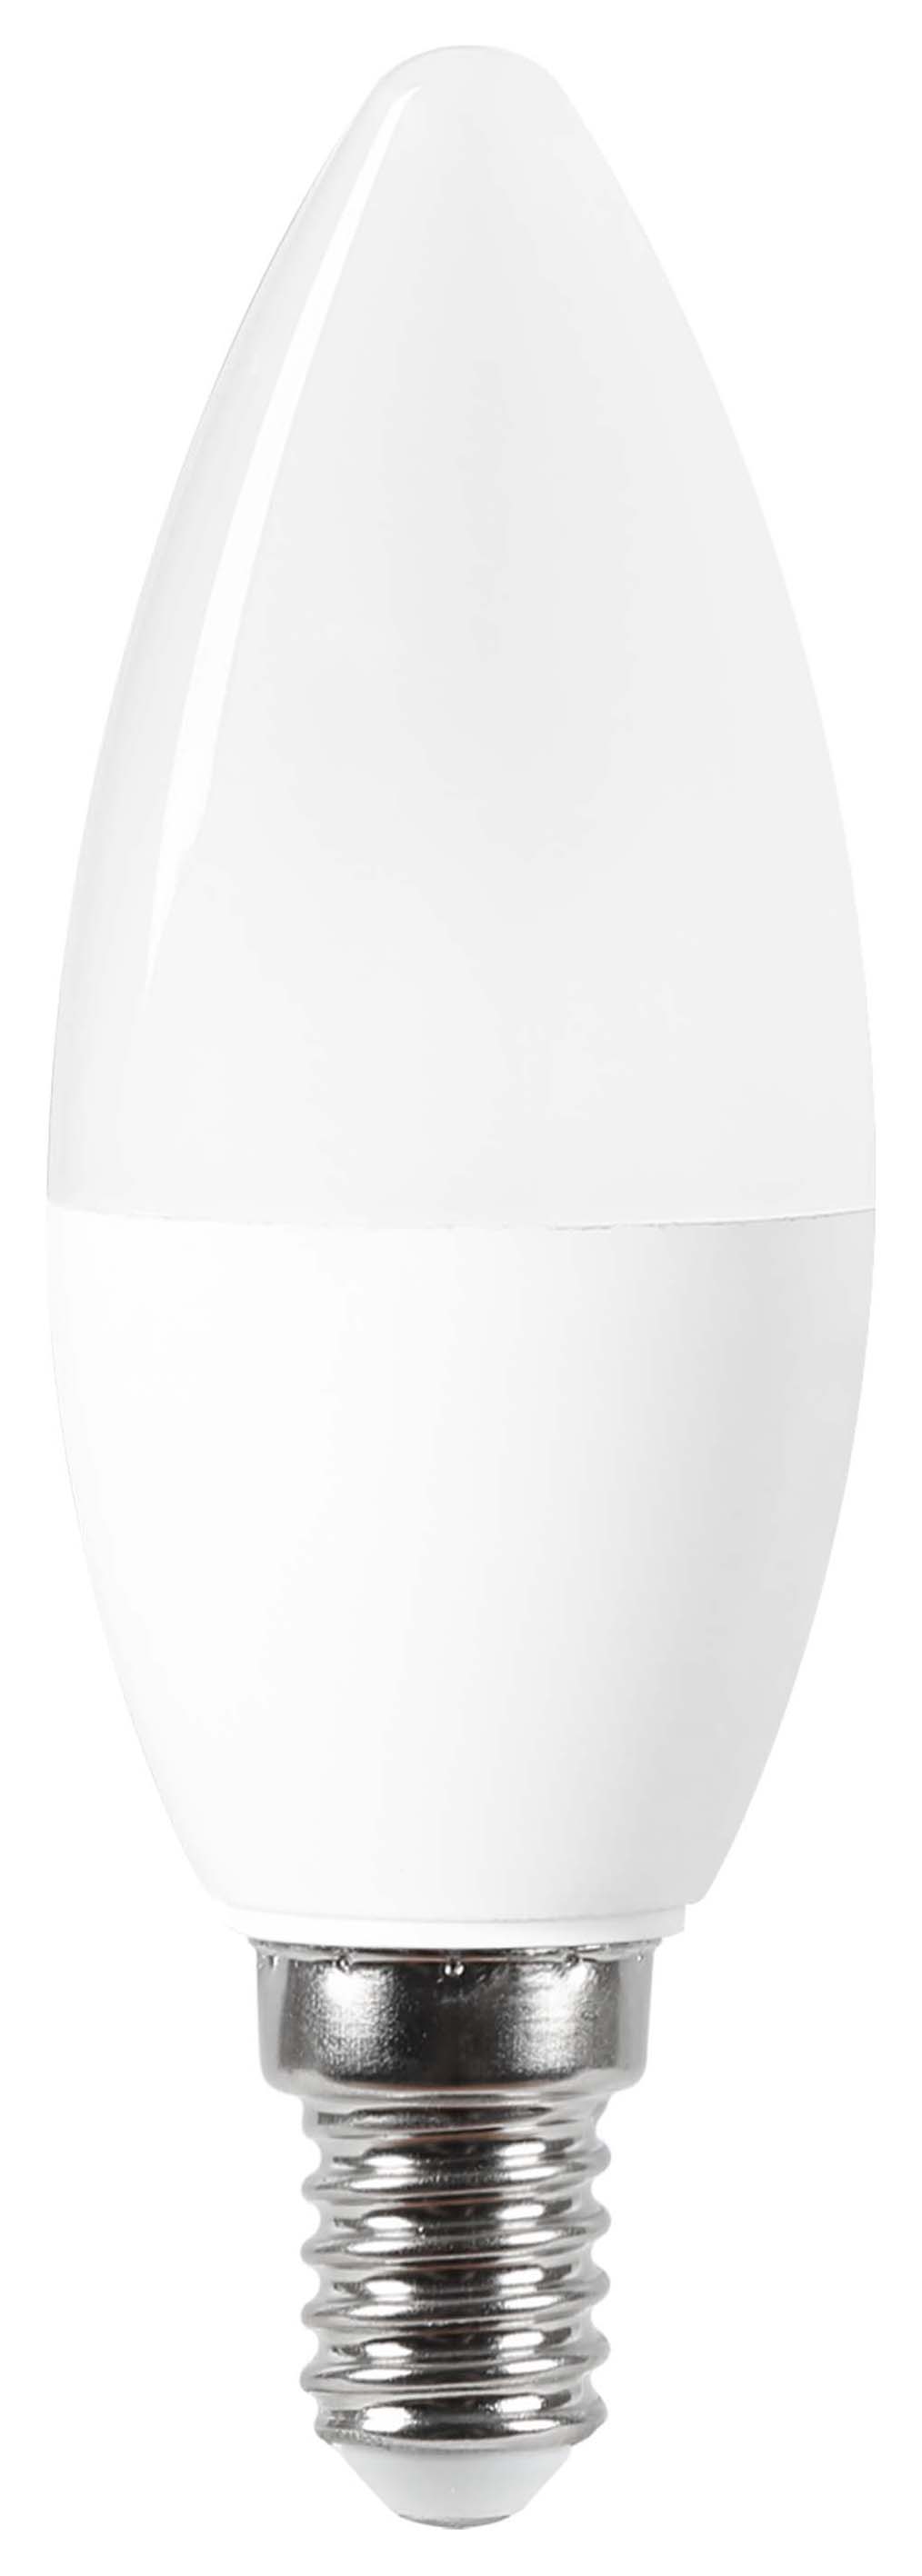 Wickes Non-Dimmable Opal LED E14 Candle 7.2W Warm White Light Bulb